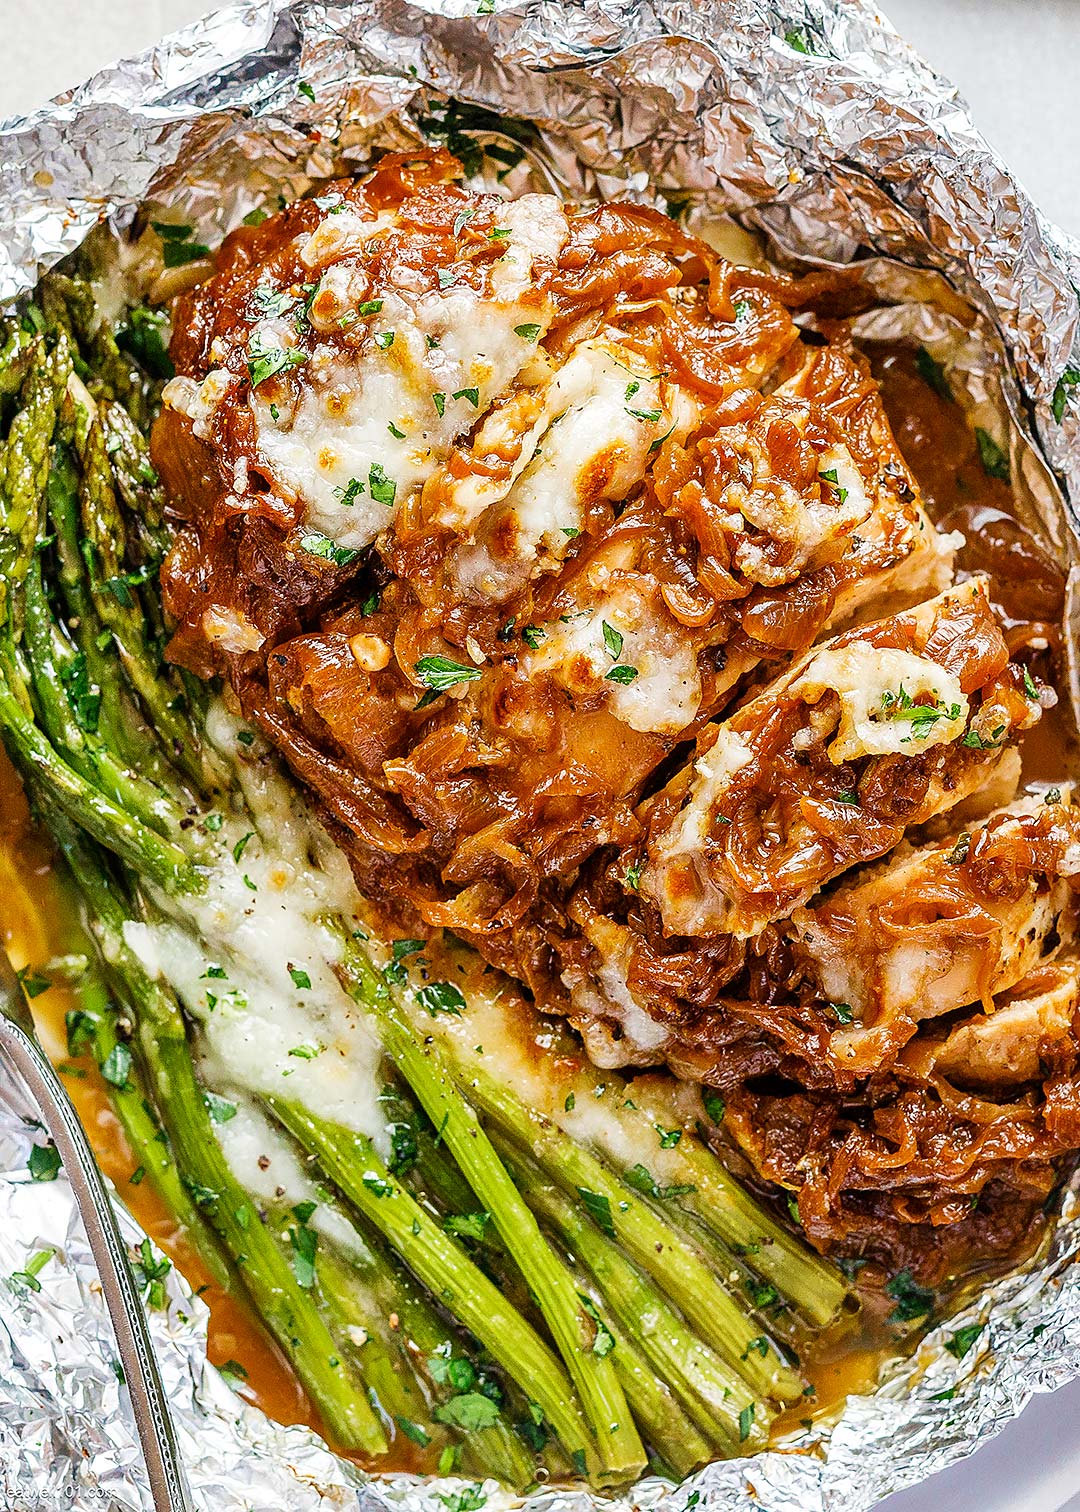 6. French Onion Chicken Foil Packets with Cheesy Asparagus